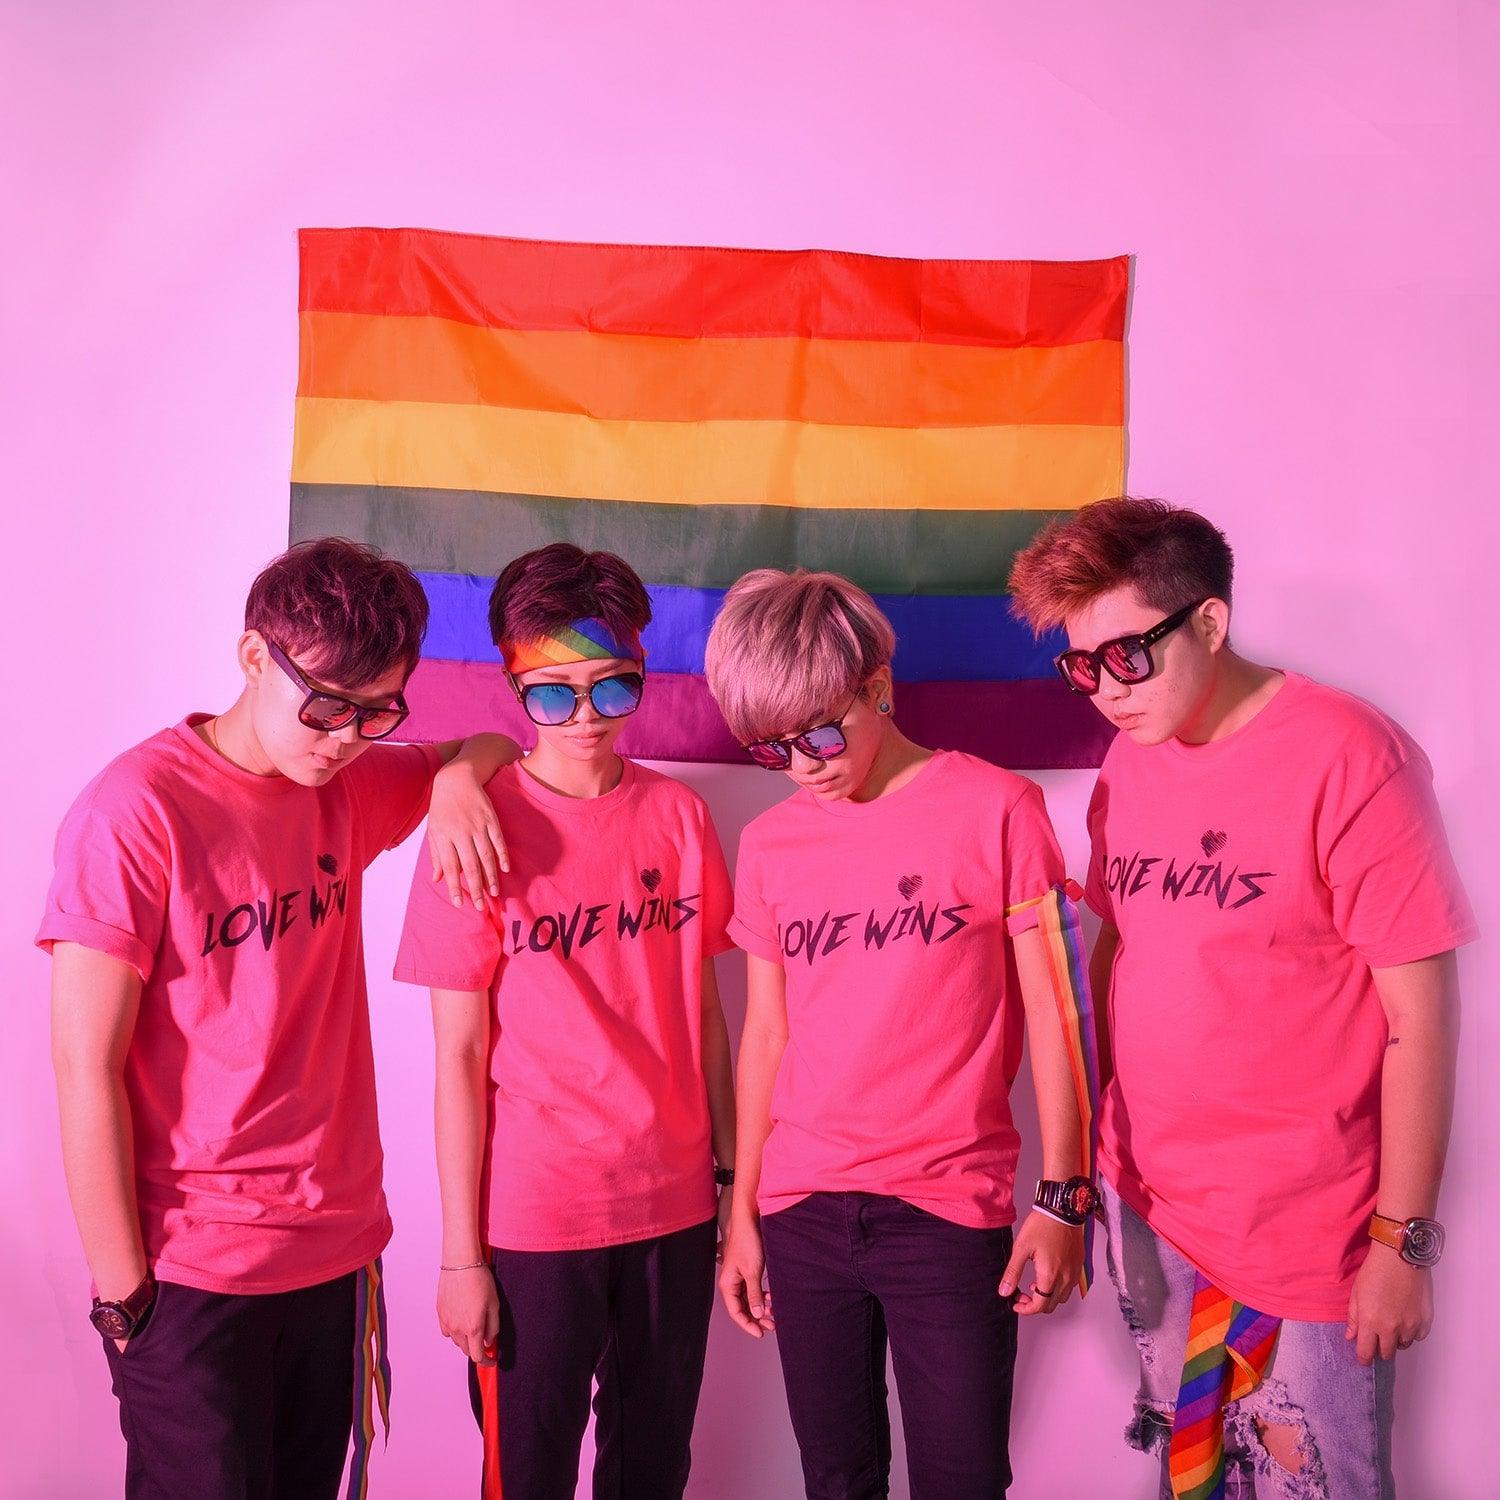 Asian tomboys in hot pink 'Love Wins' t-shirts, posing against a large pride flag backdrop, embodying the spirit of LGBT pride. Discover TOMSCOUT Flourish - LGBT Pride Kits, a vibrant celebration of love and equality in Singapore.